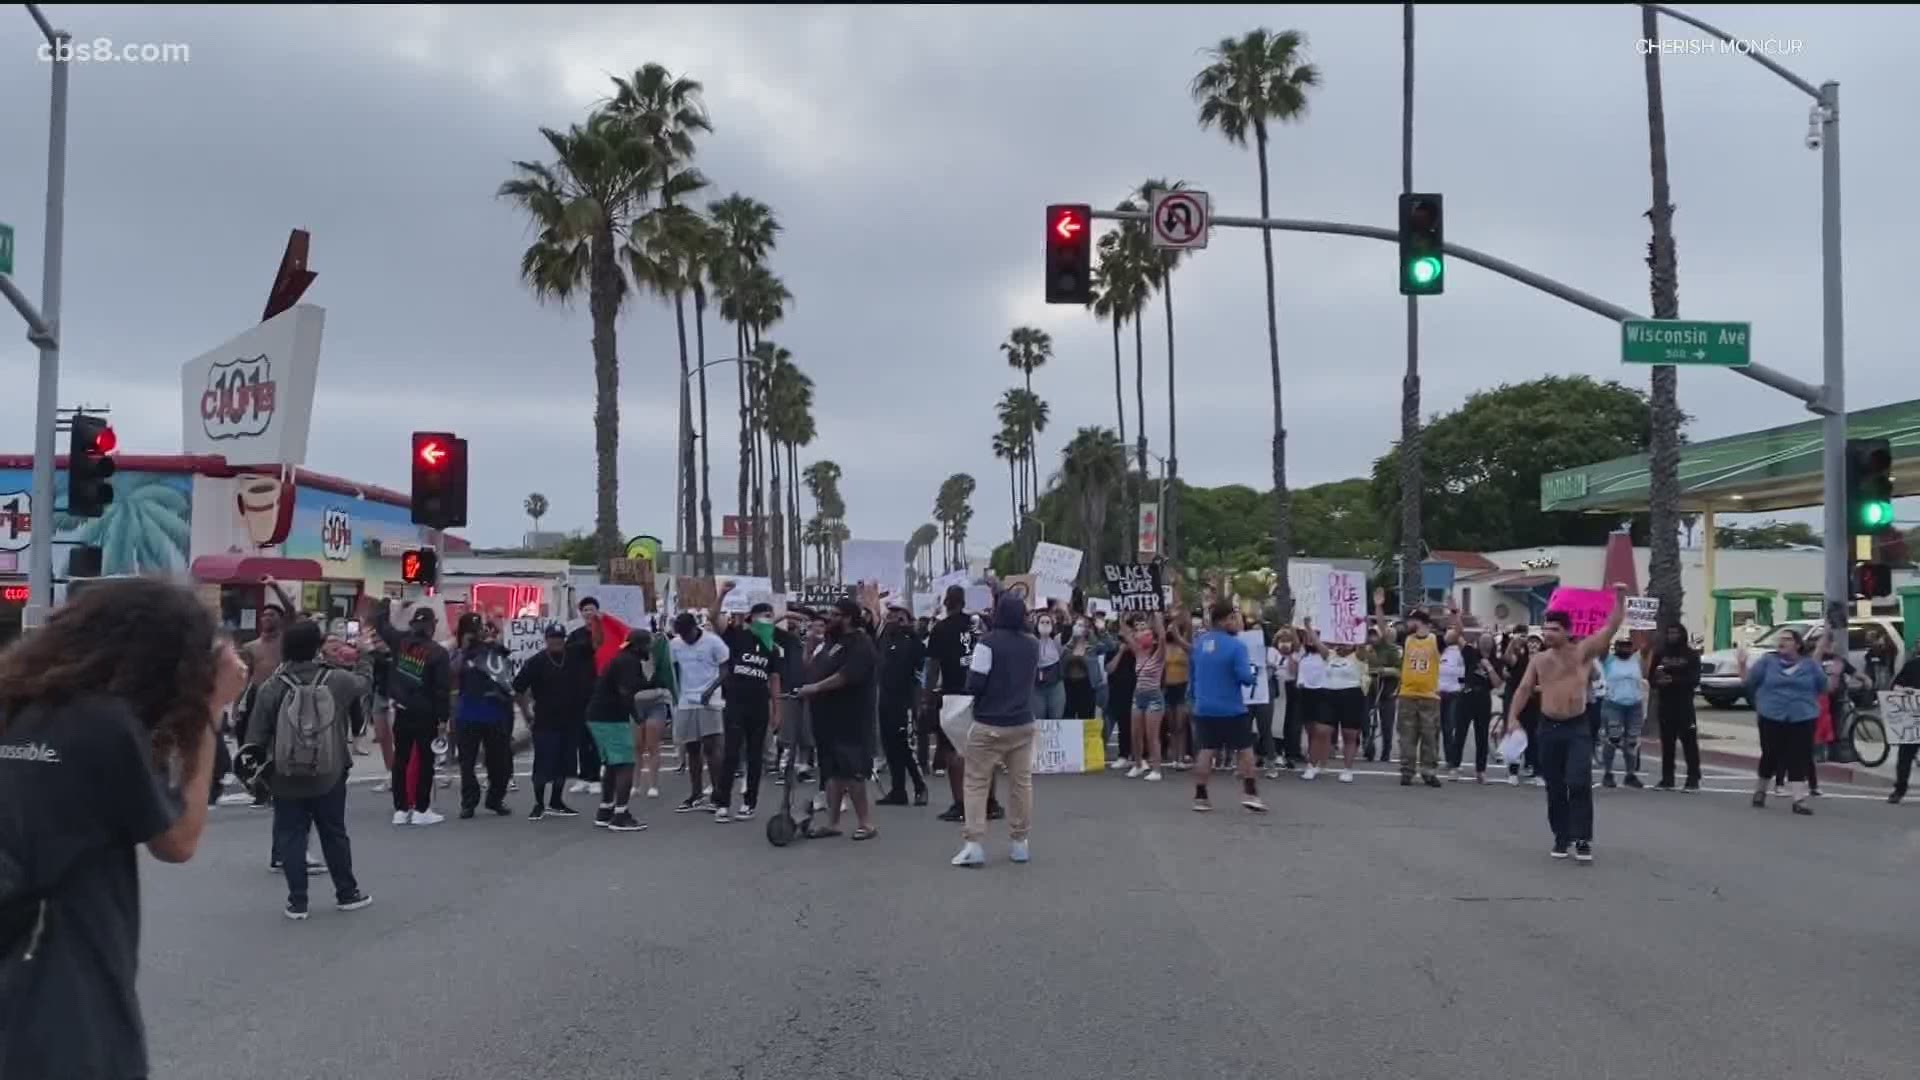 A protest was held in North County San Diego Thursday afternoon. The City of Oceanside also had a protest in the area Wednesday night.